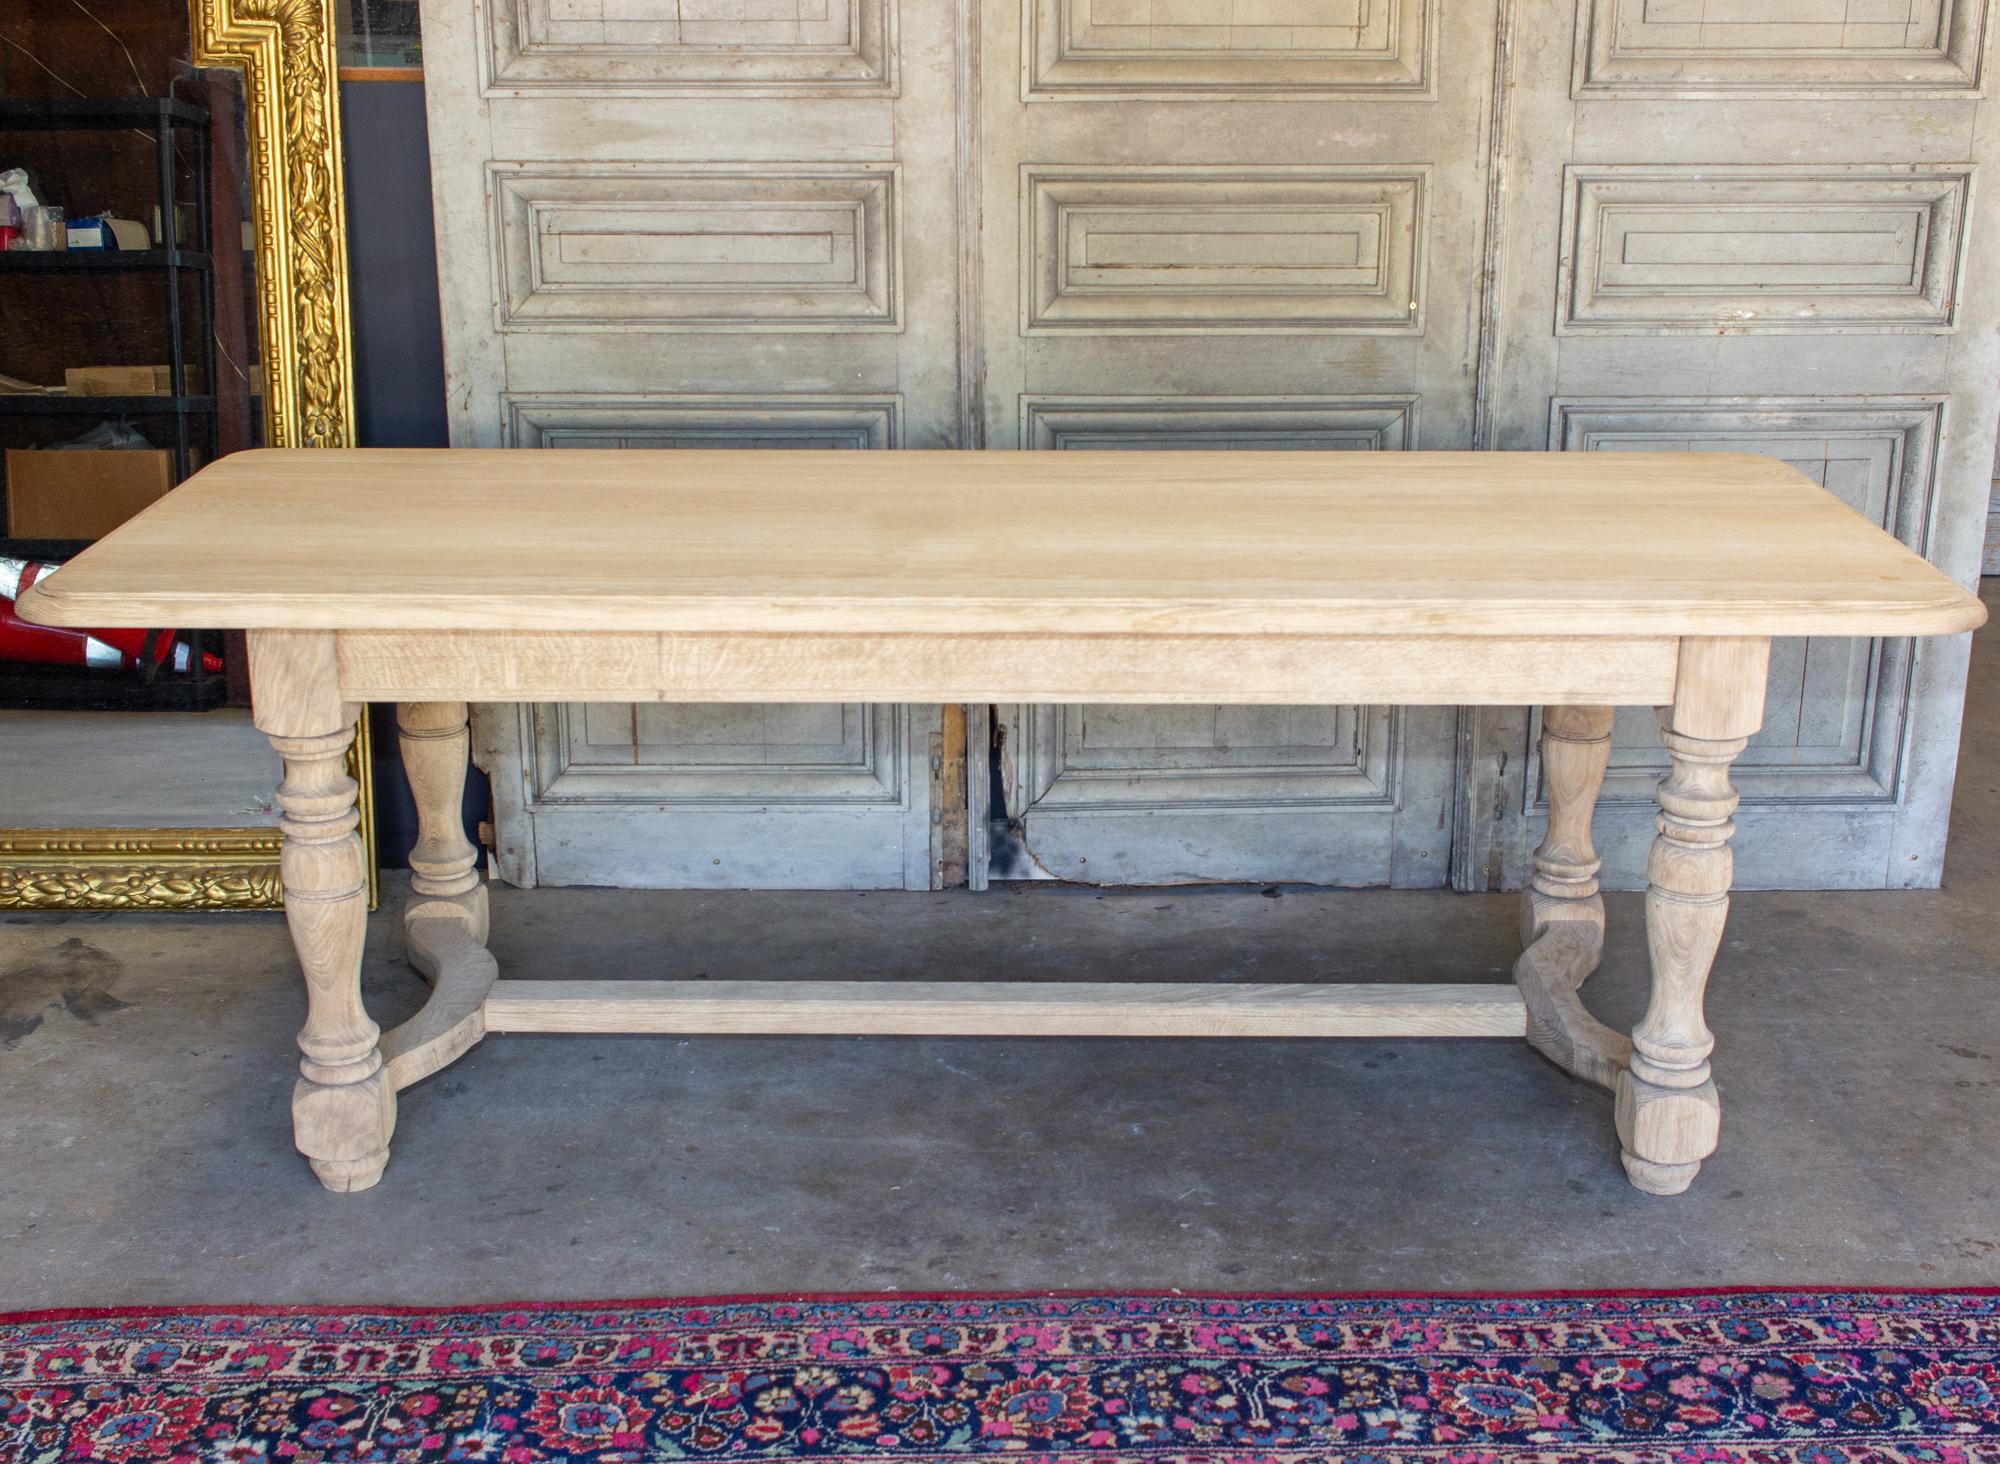 This antique French oak table has turned details in the legs, with hand carved accents in the legs and stretcher-style base with gentle curves at each end, between legs. The top itself has a beveled edge and rounded corners. The legs are